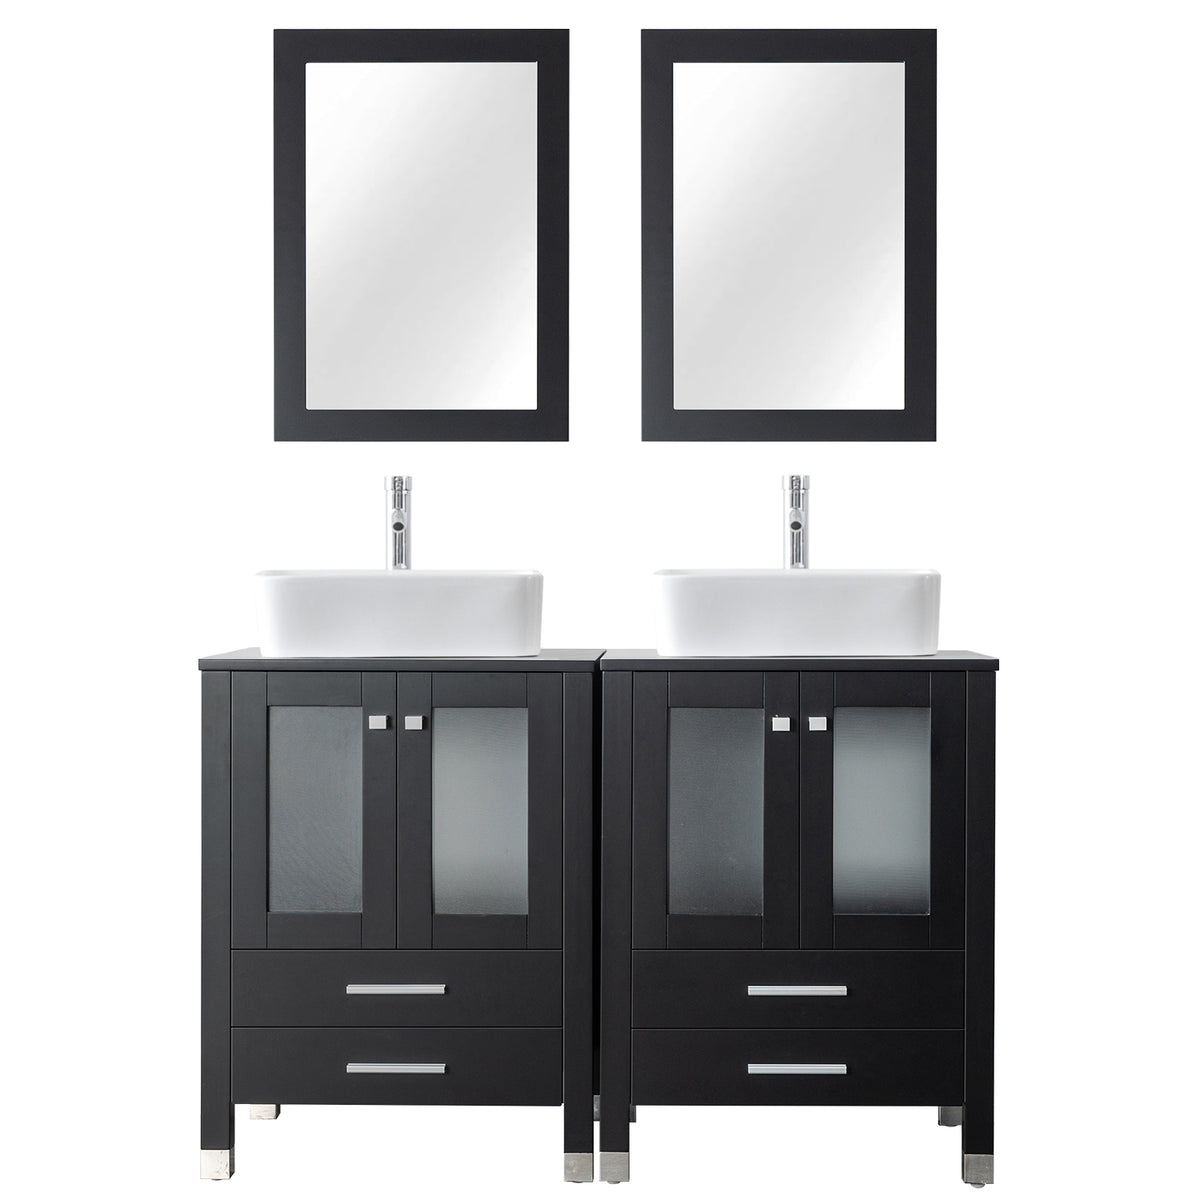 Eclife 48" Double Bathroom Vanity Sink Combos with Solid Wood Construction and Painted Frame - Black